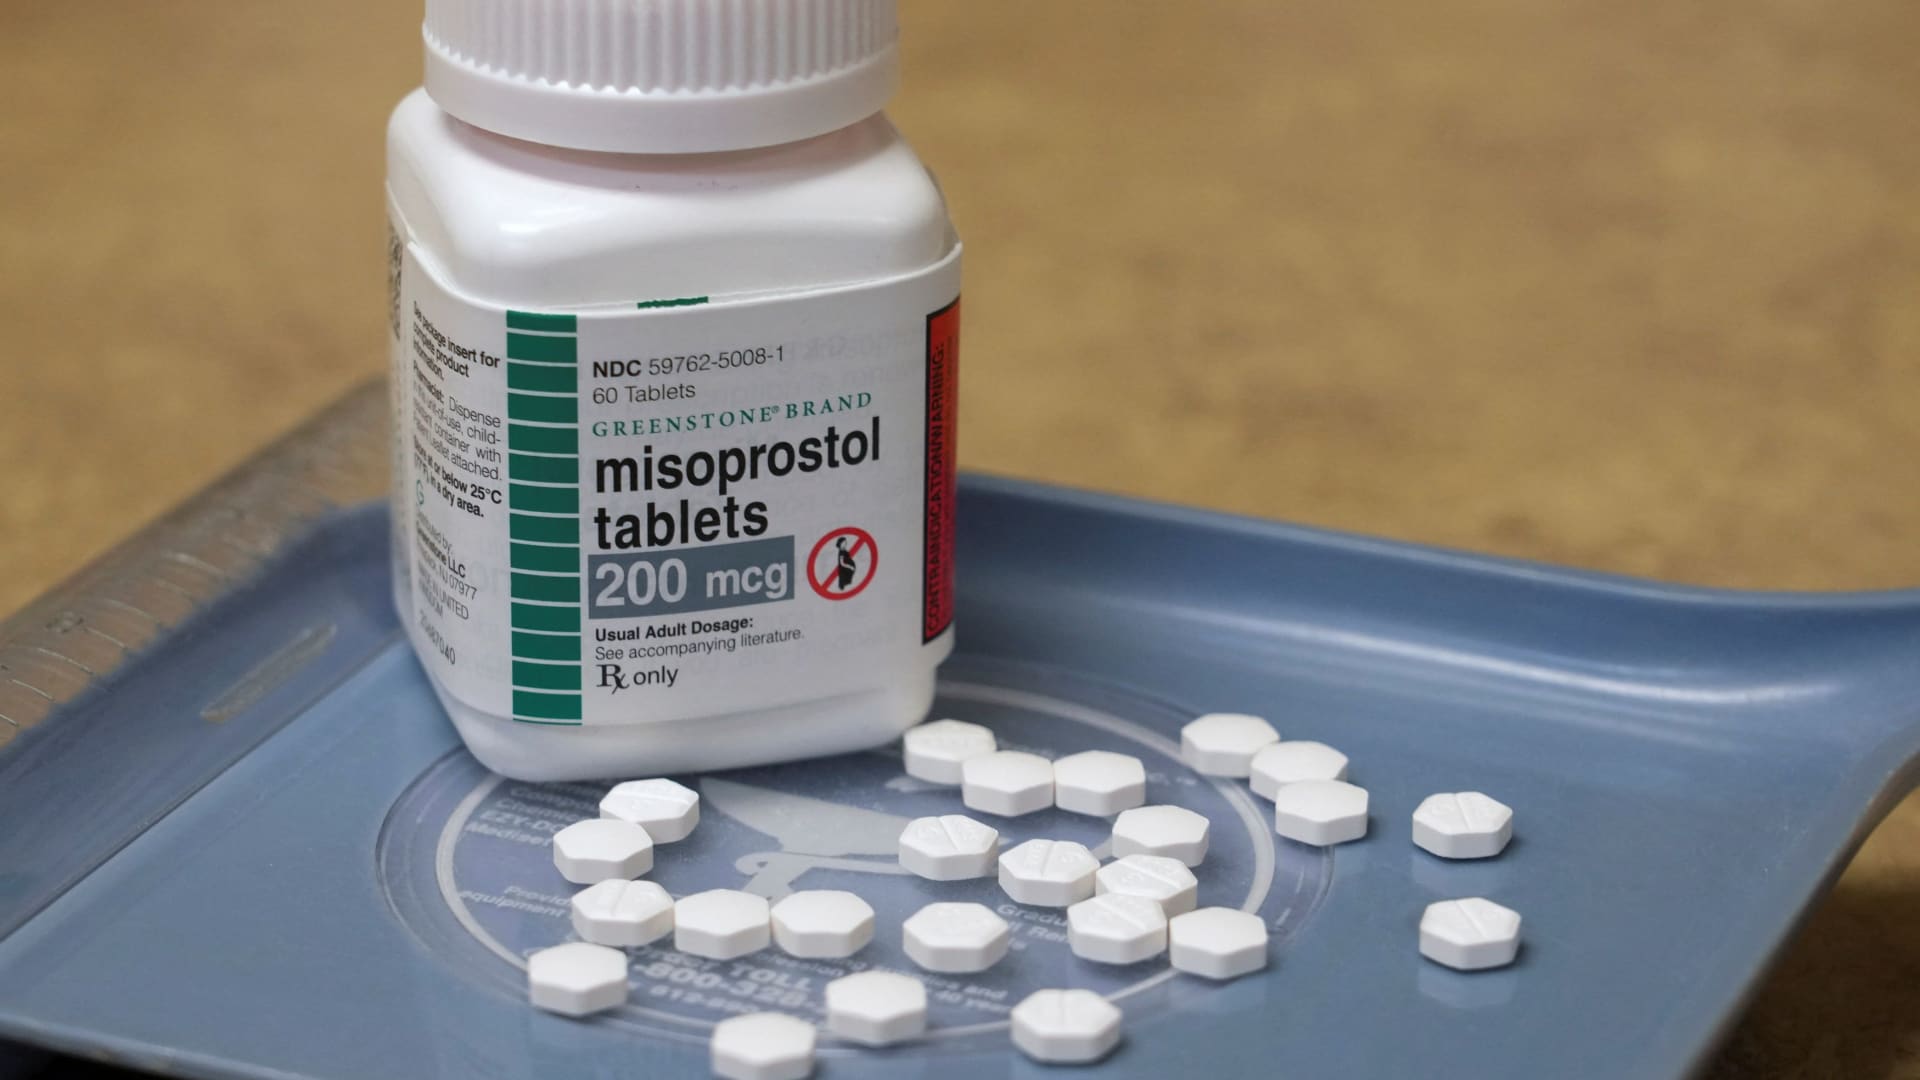 New York and California are stockpiling different abortion tablet misoprostol